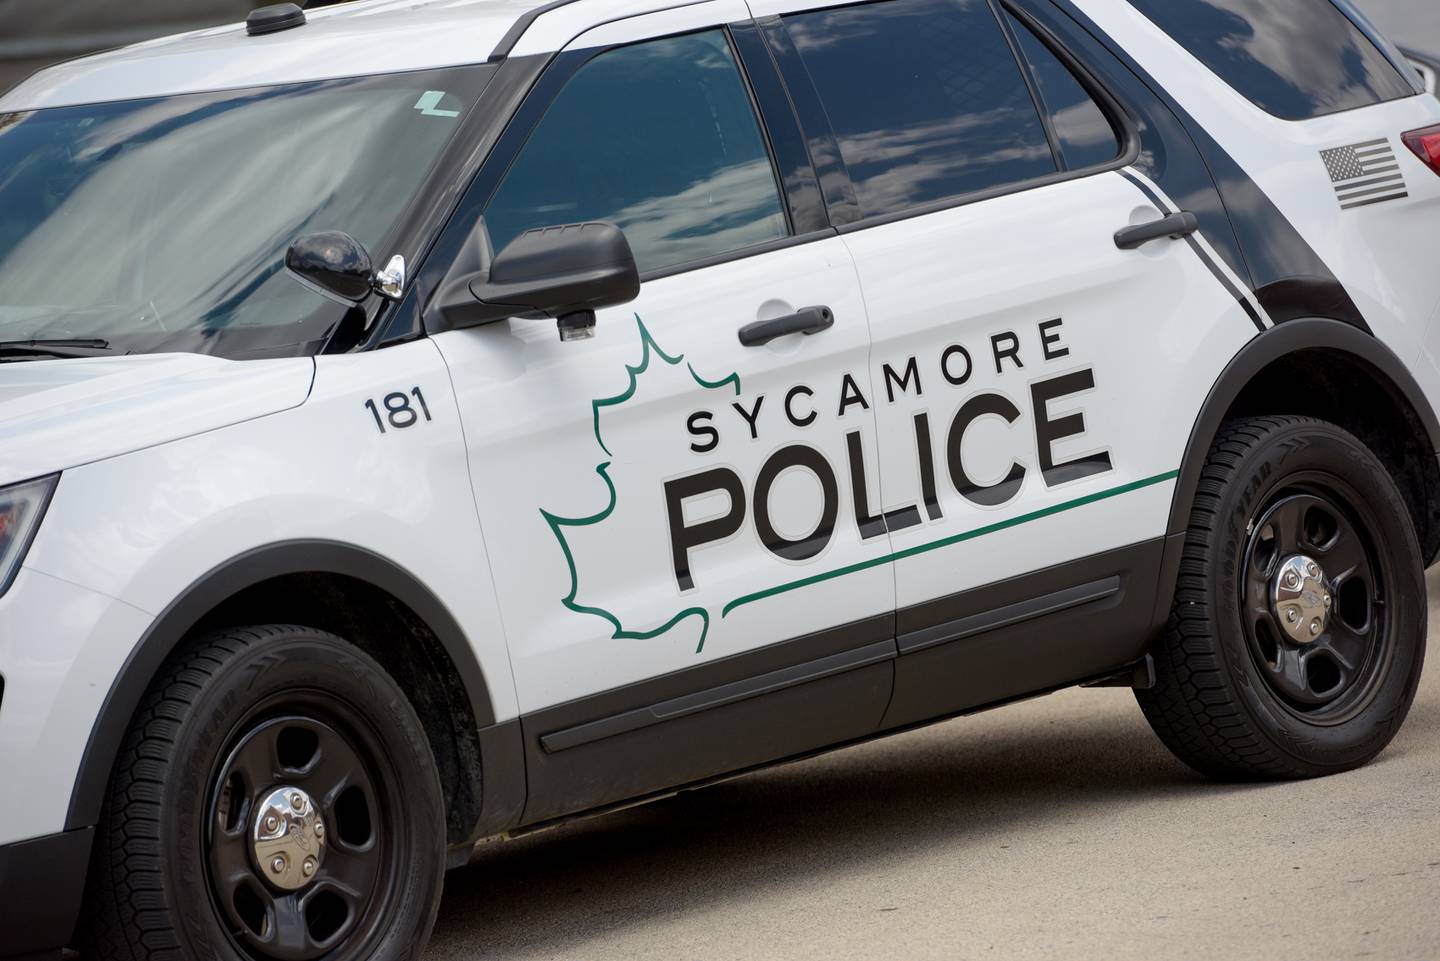 Sycamore Police Department vehicle in Sycamore, IL on Thursday, May 13, 2021.